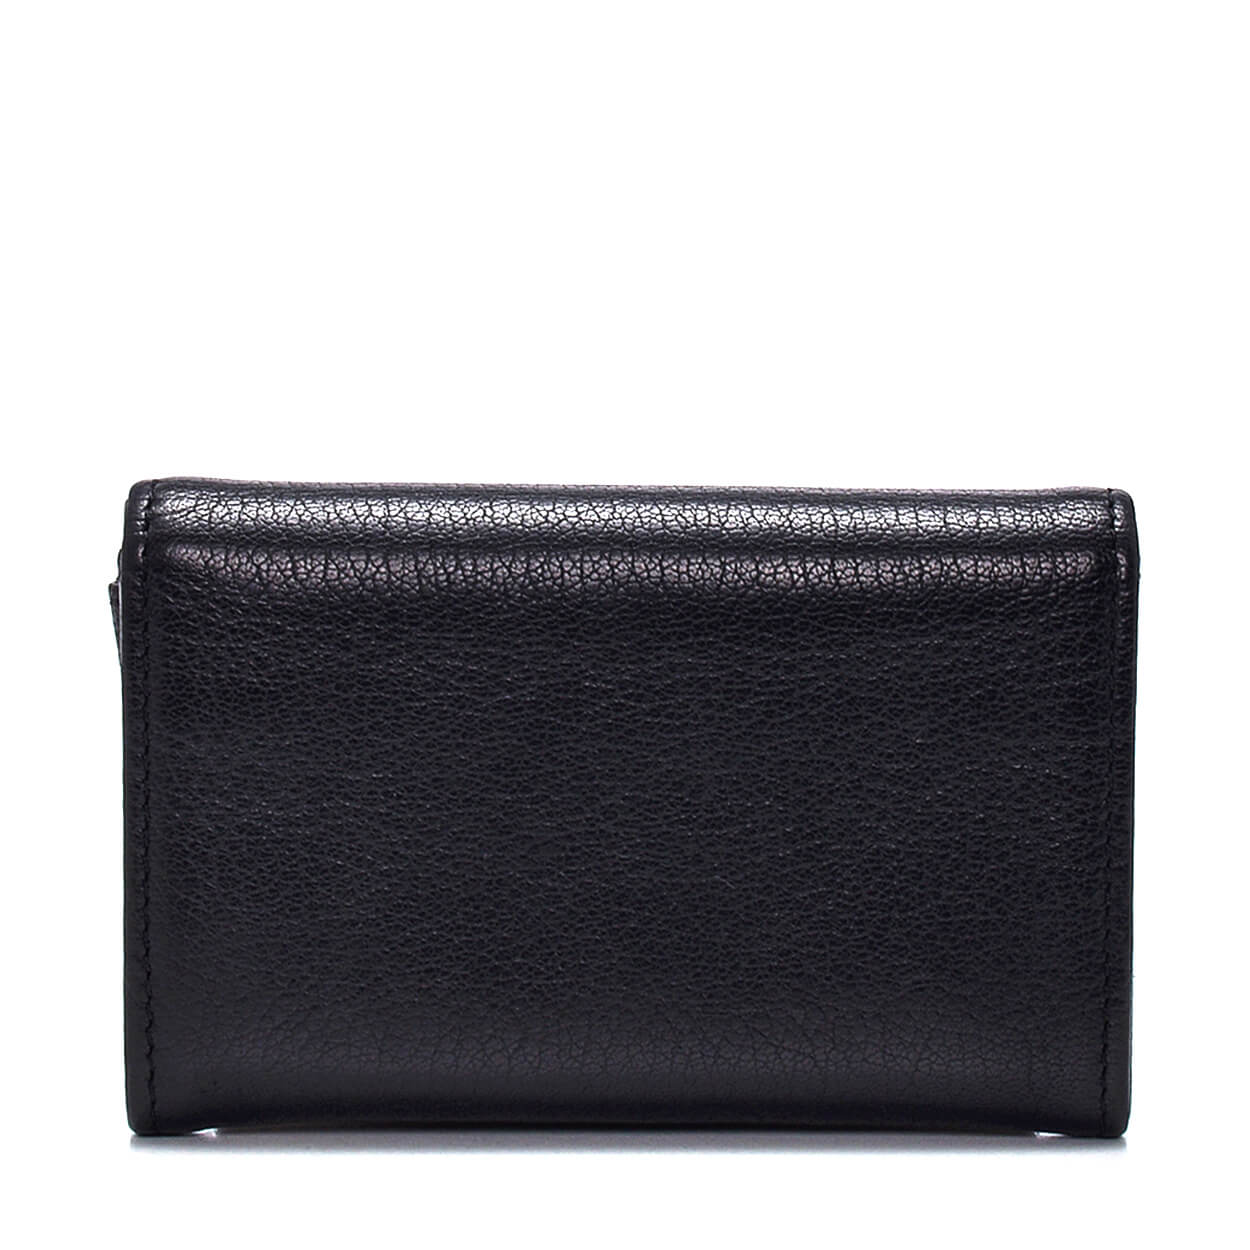 Chanel - Black Grained Leather CC Card Holder